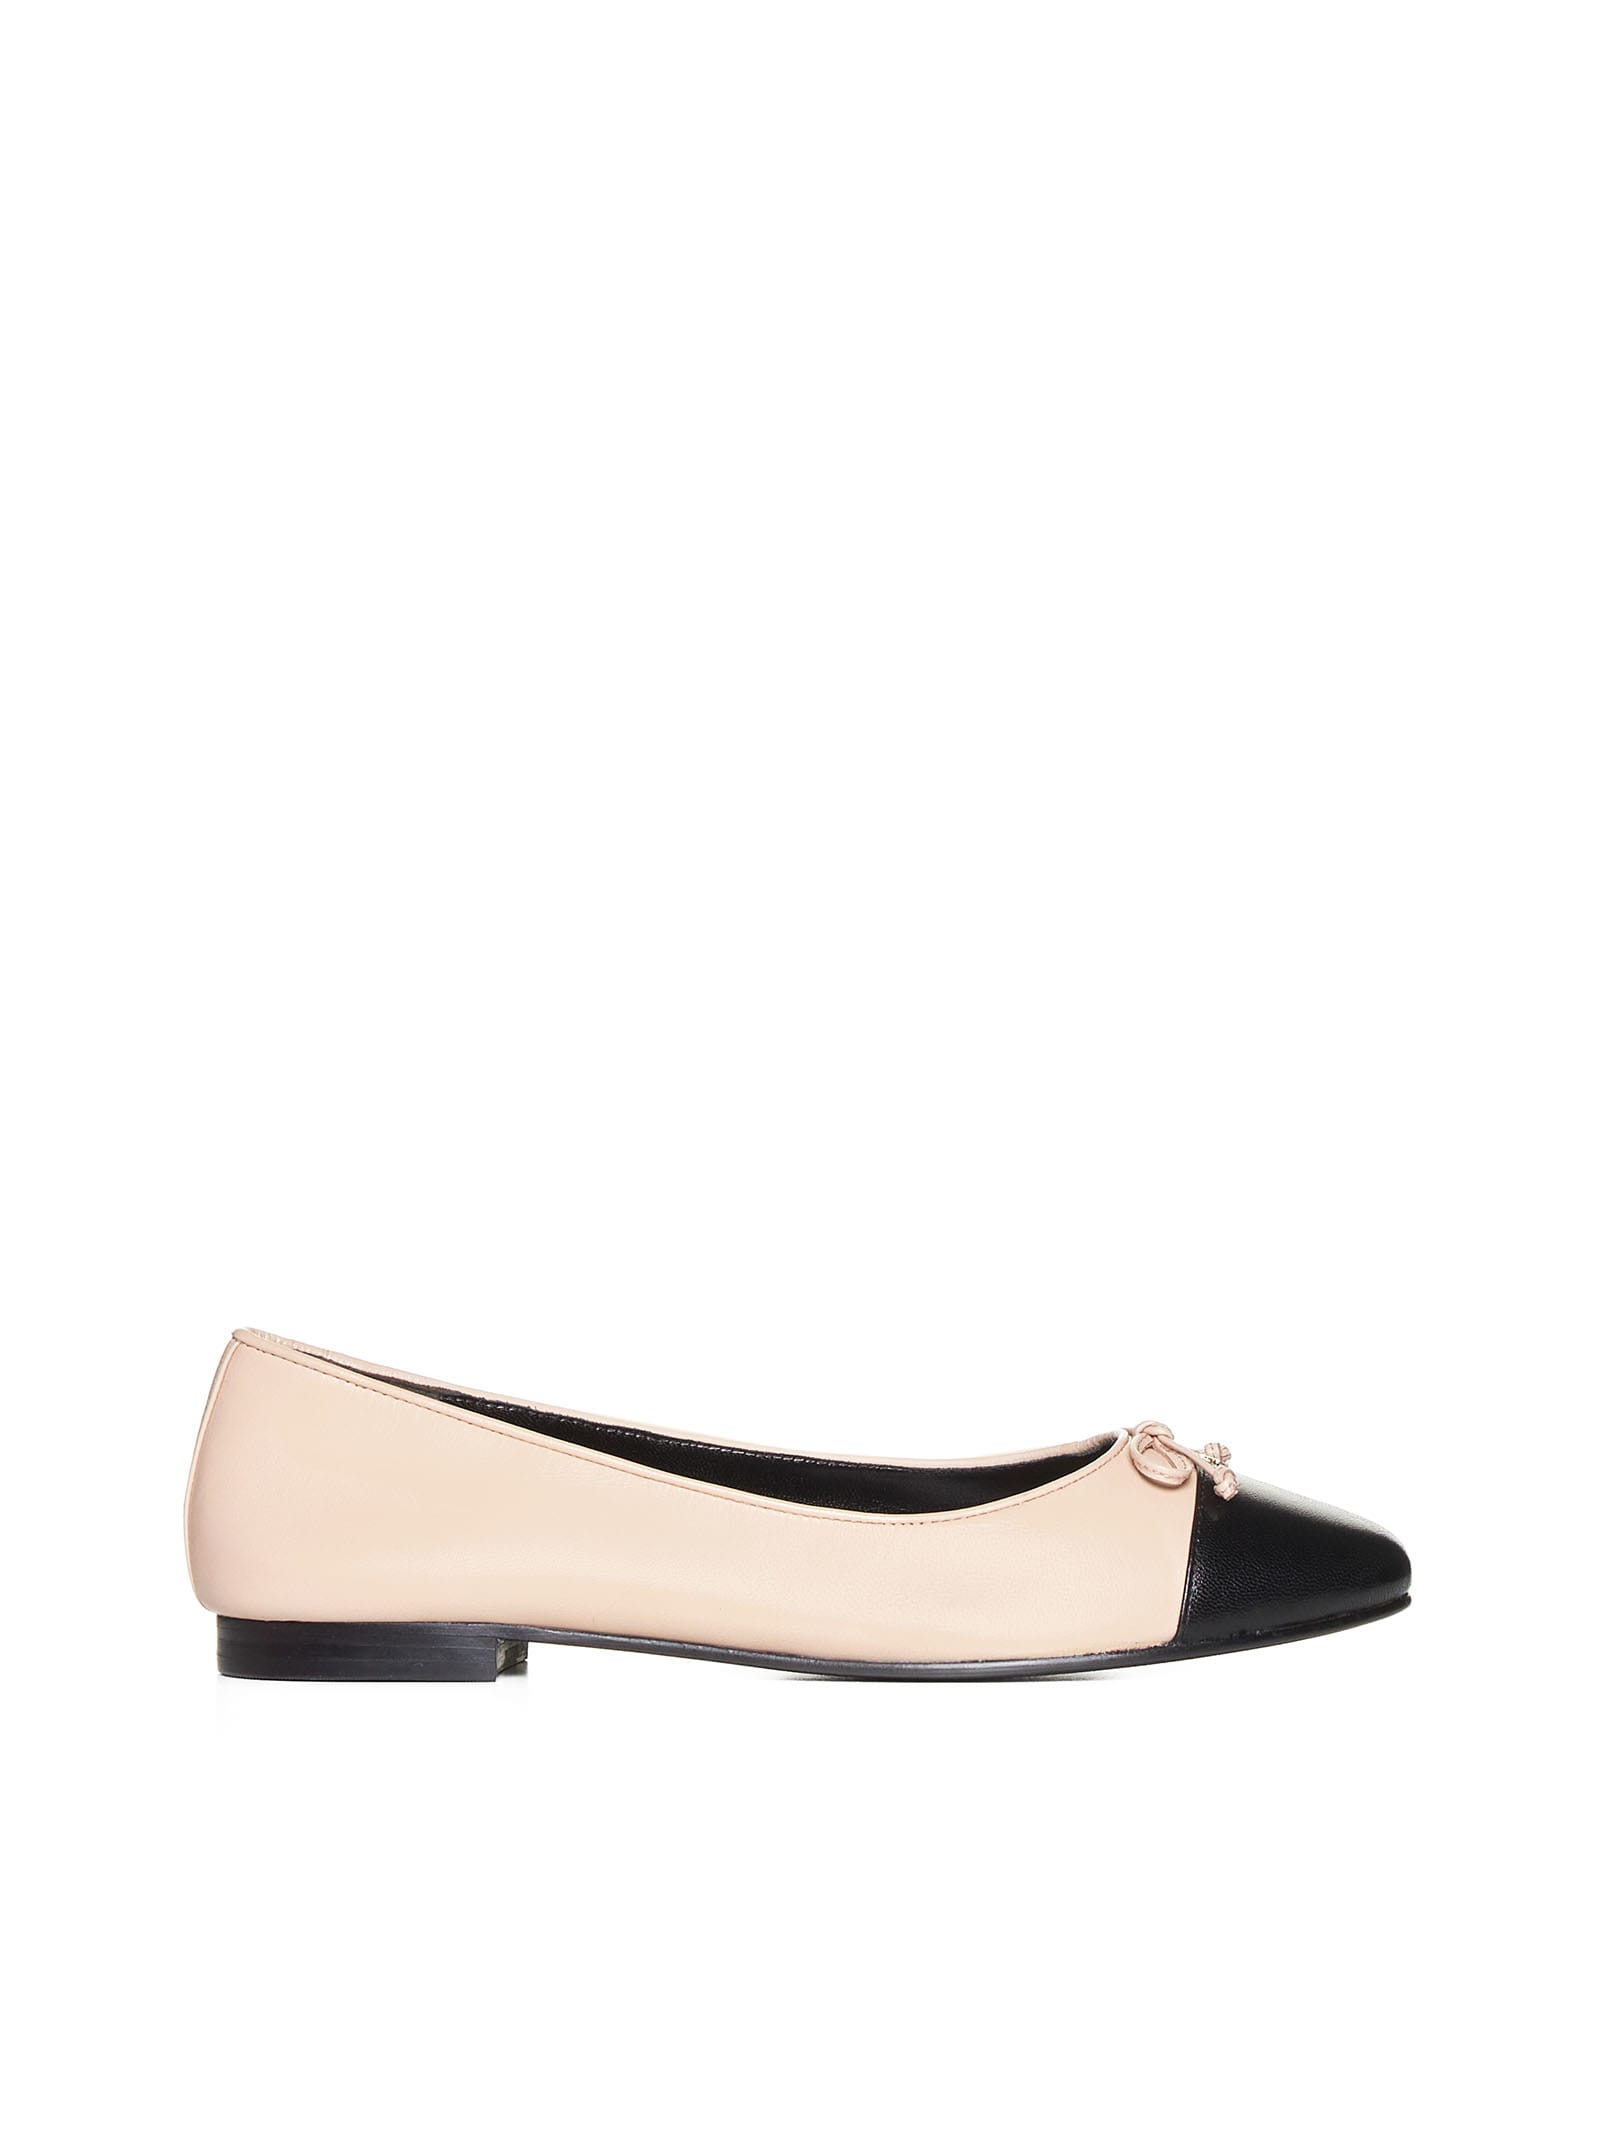 Tory Burch Flat Shoes In Rose Pink / Perfect Black